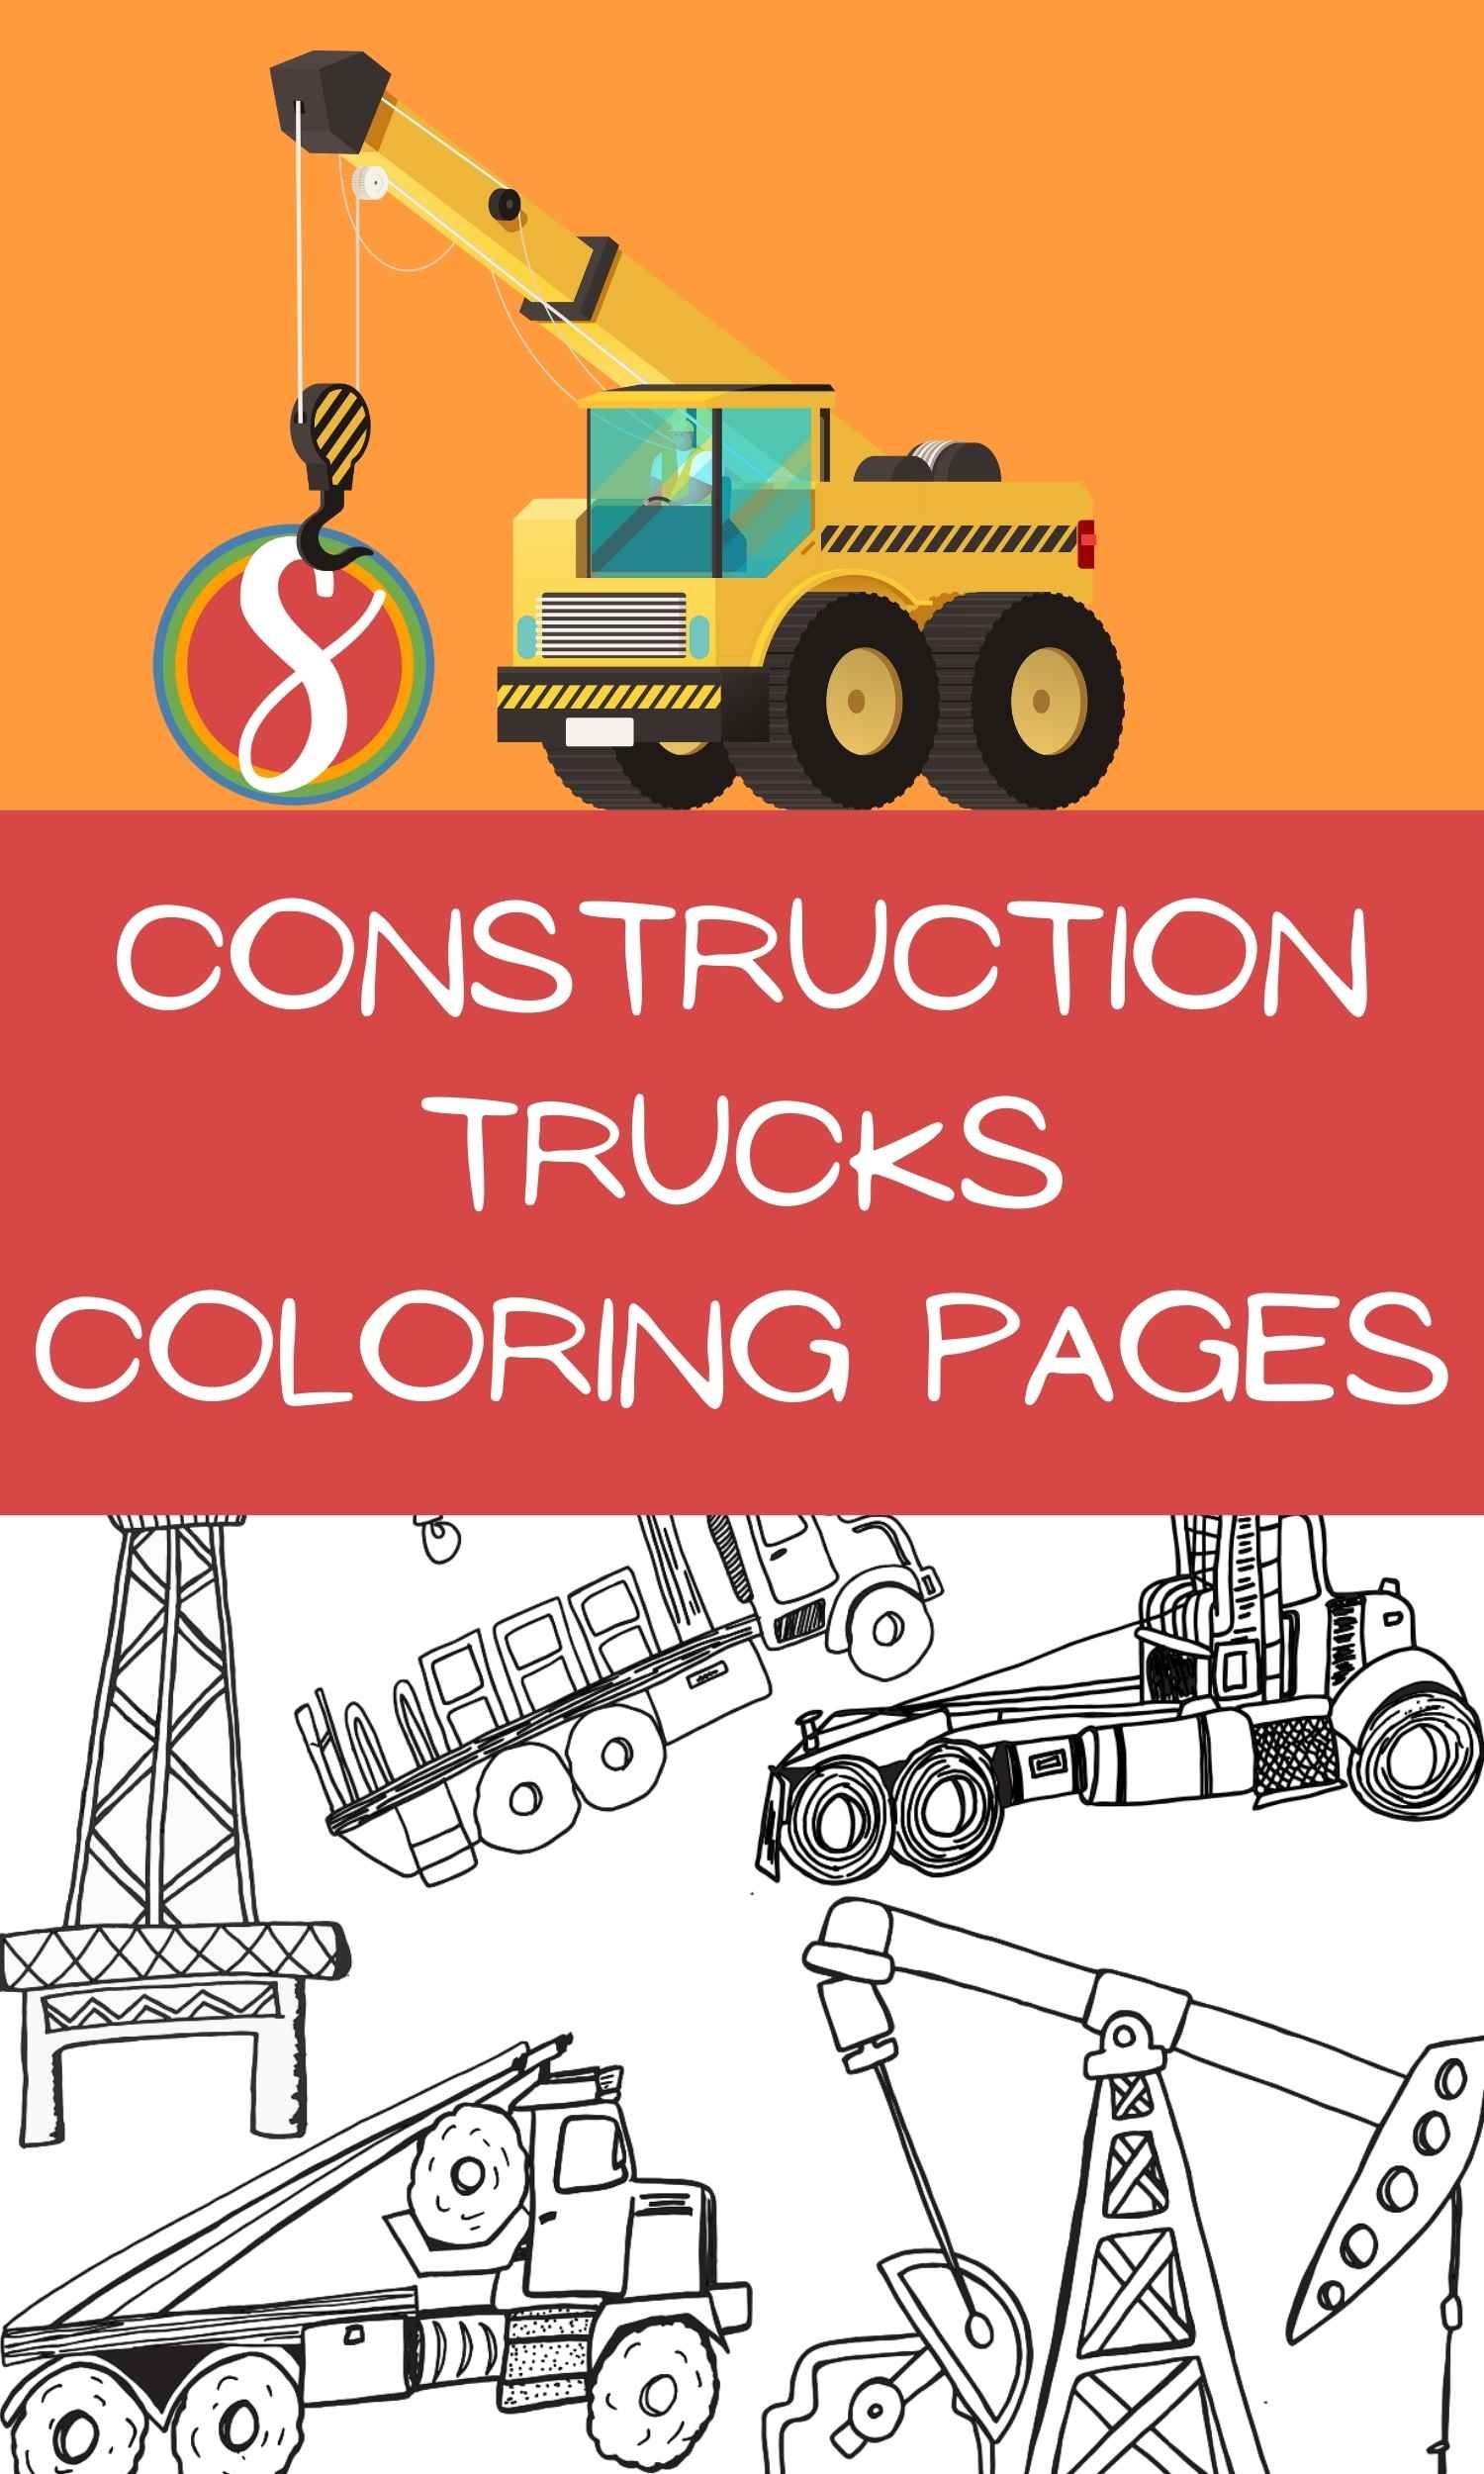 text "construction trucks coloring page" drawings of trucks and oil rigs